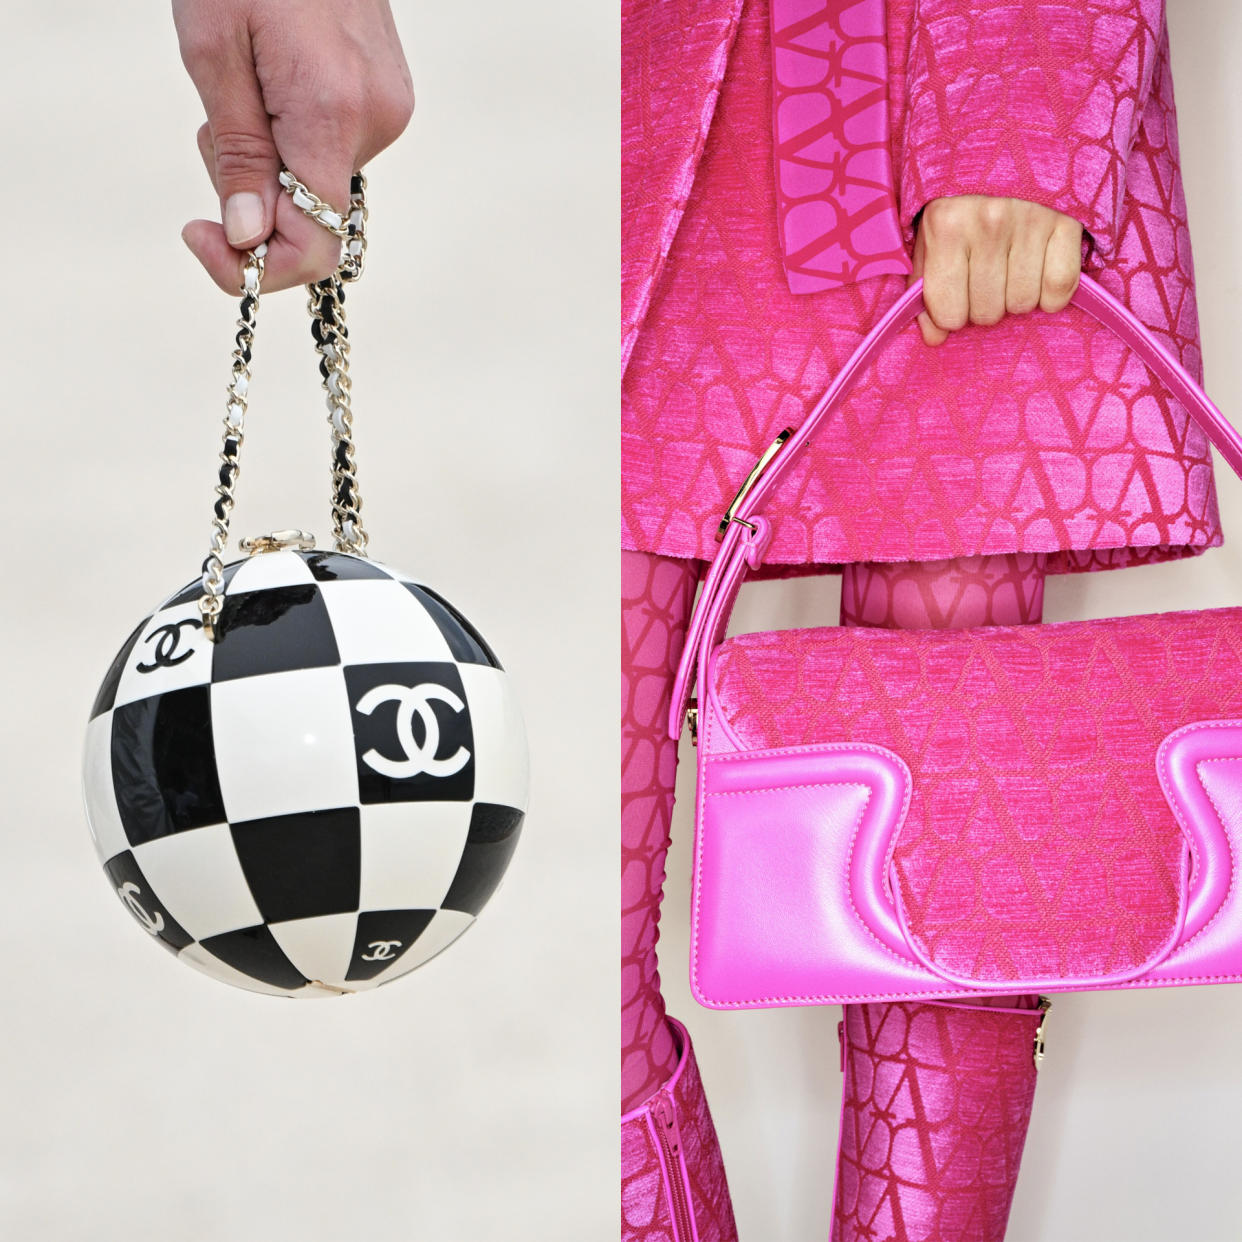  winter 2022 2023 bag trends at Givenchy, Chanel, Valentino 